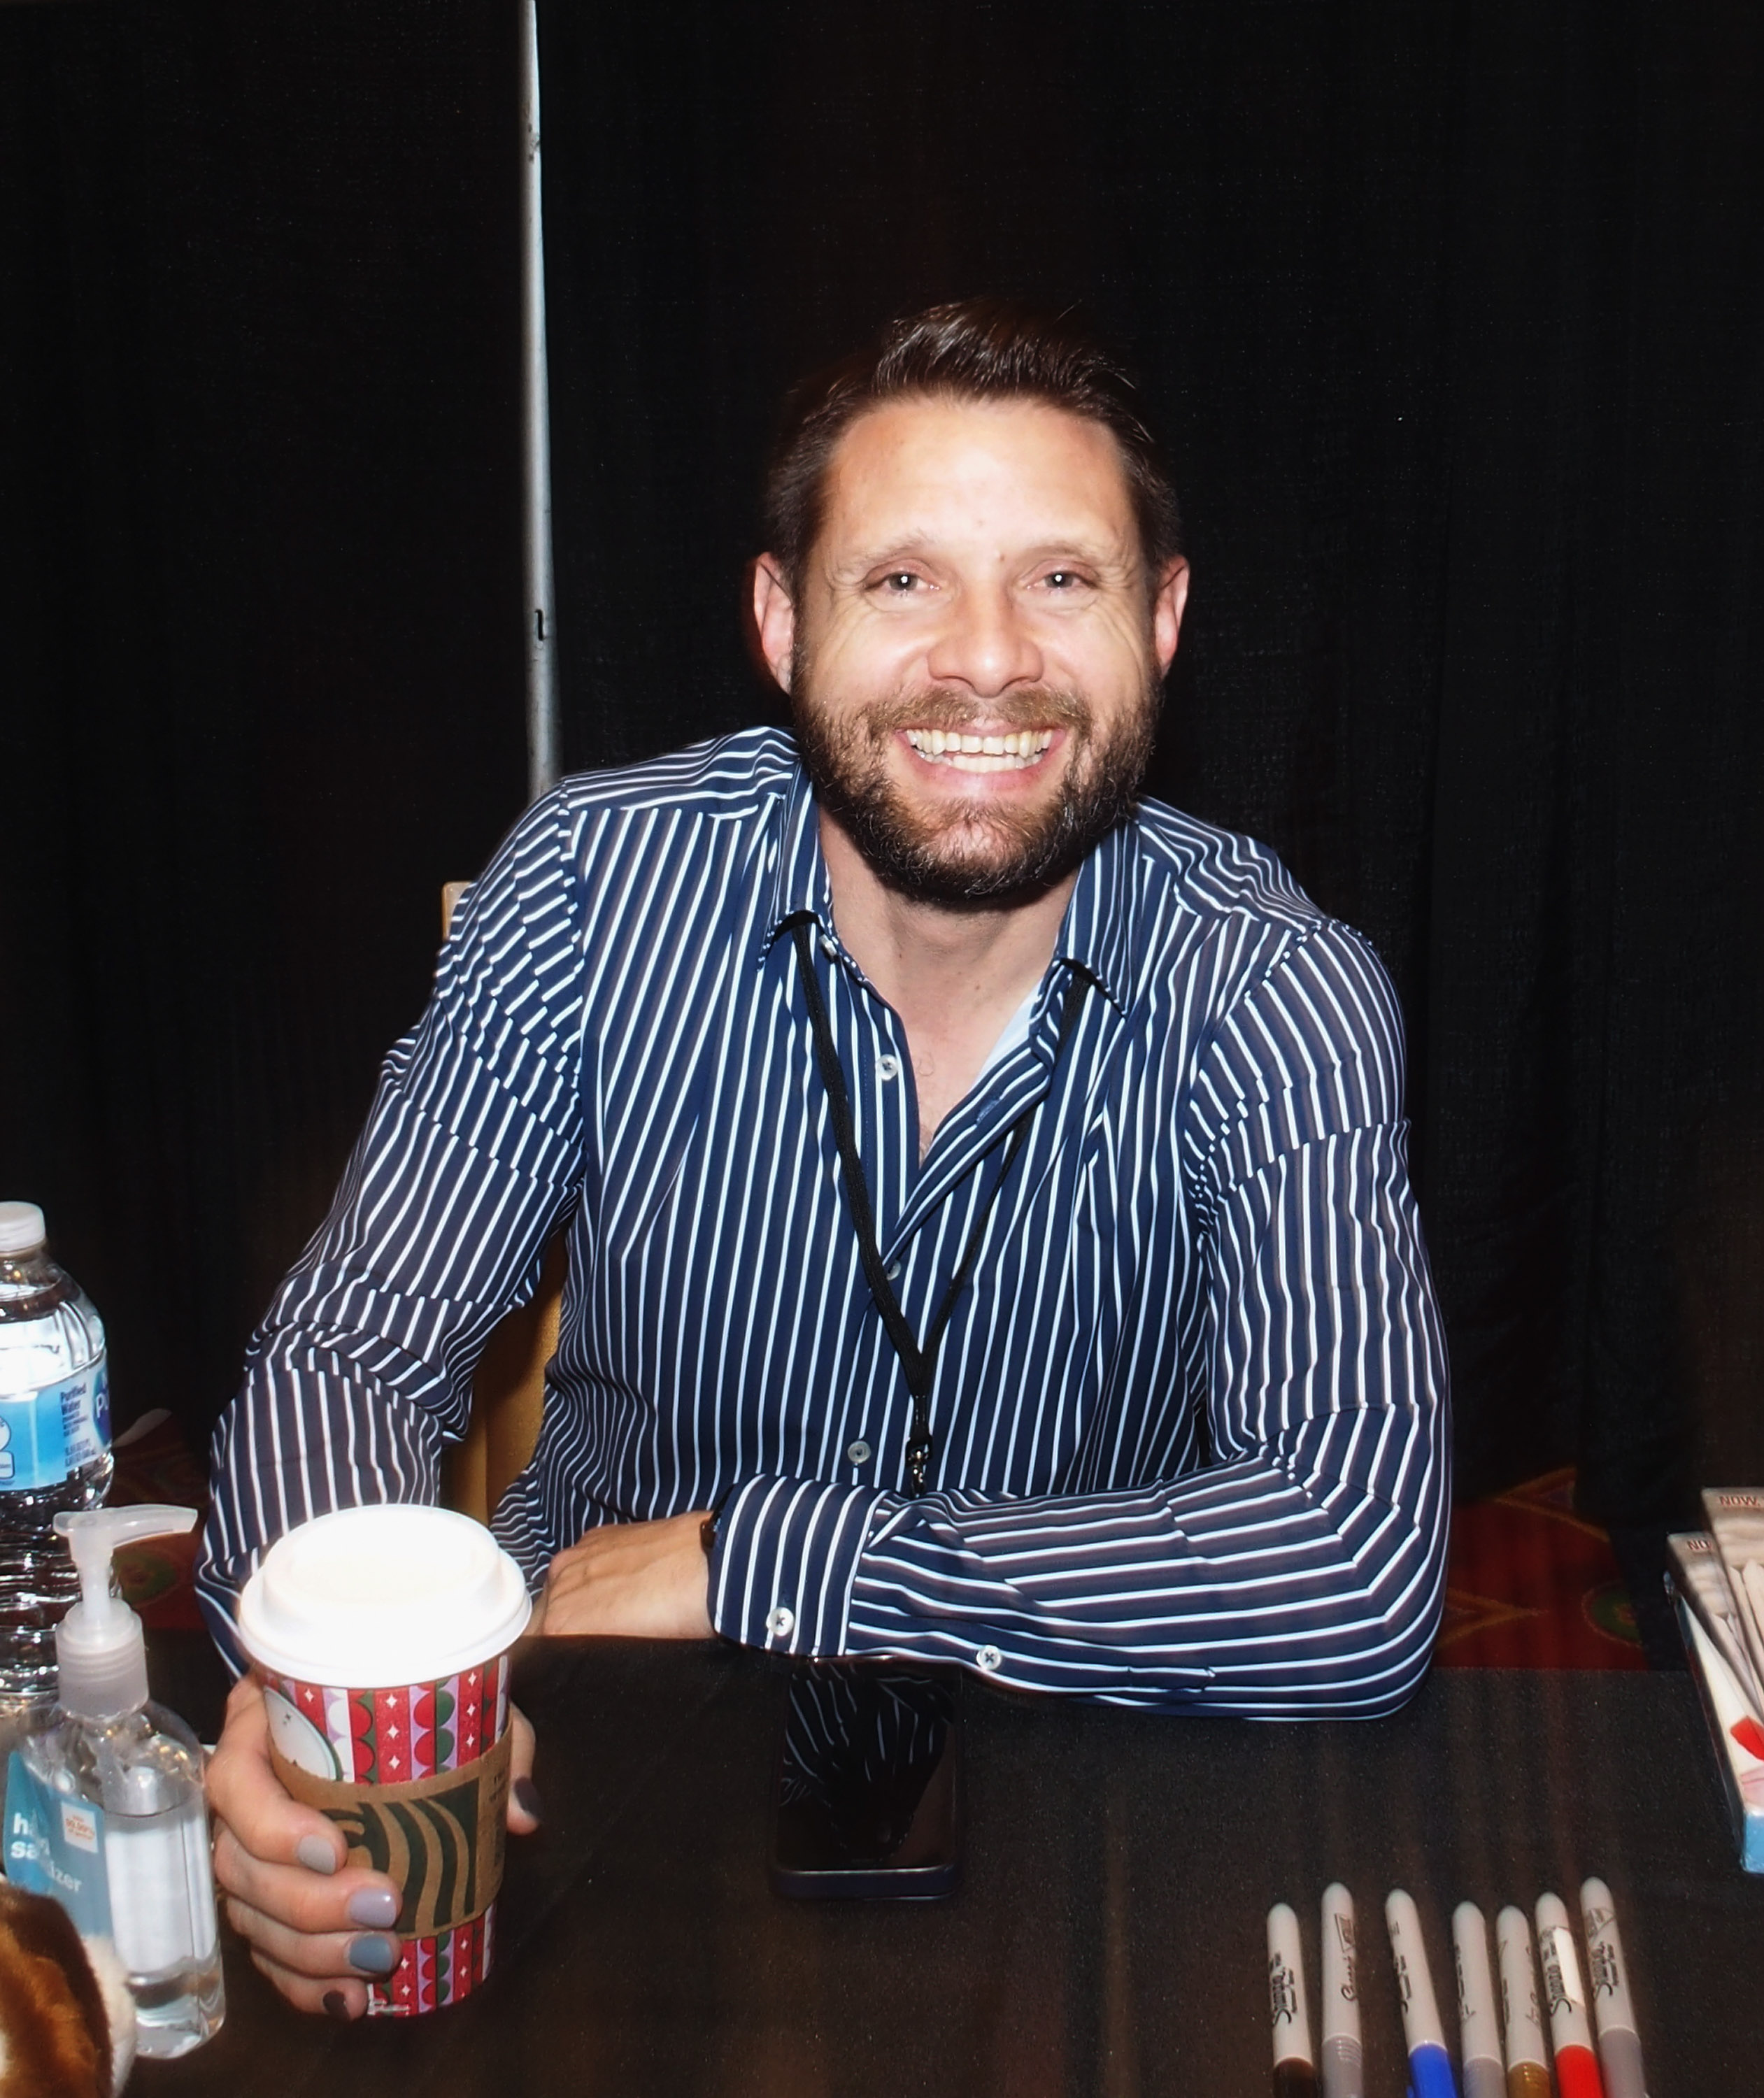 <p><span>Danny Pintauro left Hollywood behind when "Who's the Boss?" came to an end in 1992. The former child star, who graduated from Stanford University, has worked as a Tupperware salesman and a restaurant manager since putting his acting days behind him. In 2019, he took to Instagram to reveal that he'd become a vet and pharmacy technician at Austin Pets Alive in Texas. In 2014, Danny and Wil Tabares tied the knot and the following year, he revealed to Oprah Winfrey that he's HIV positive. "I don't want to be a hero. I don't want to be the role model," he told Us Weekly. "I want to be the example." In 2020, he dipped his toes back into acting on "The Quarantine Bunch," a web comedy series featuring former child stars.</span> </p><p>In 2023, he<a href="https://www.wonderwall.com/news/hiv-positive-whos-the-boss-actor-rips-candace-cameron-bure-over-horrifying-2015-interview-692959.article"> took a shot at former child star </a>Candace Cameron Bure for what she said during an interview they did on "The View" discussing his HIV-positive status (she accused him of living a lifestyle of "heightened sex" and asked if he took any "responsibility" for "being promiscuous"). According to Danny, "It was horrifying. It was one of the lowest moments of the journey I had after coming out to Oprah."</p>